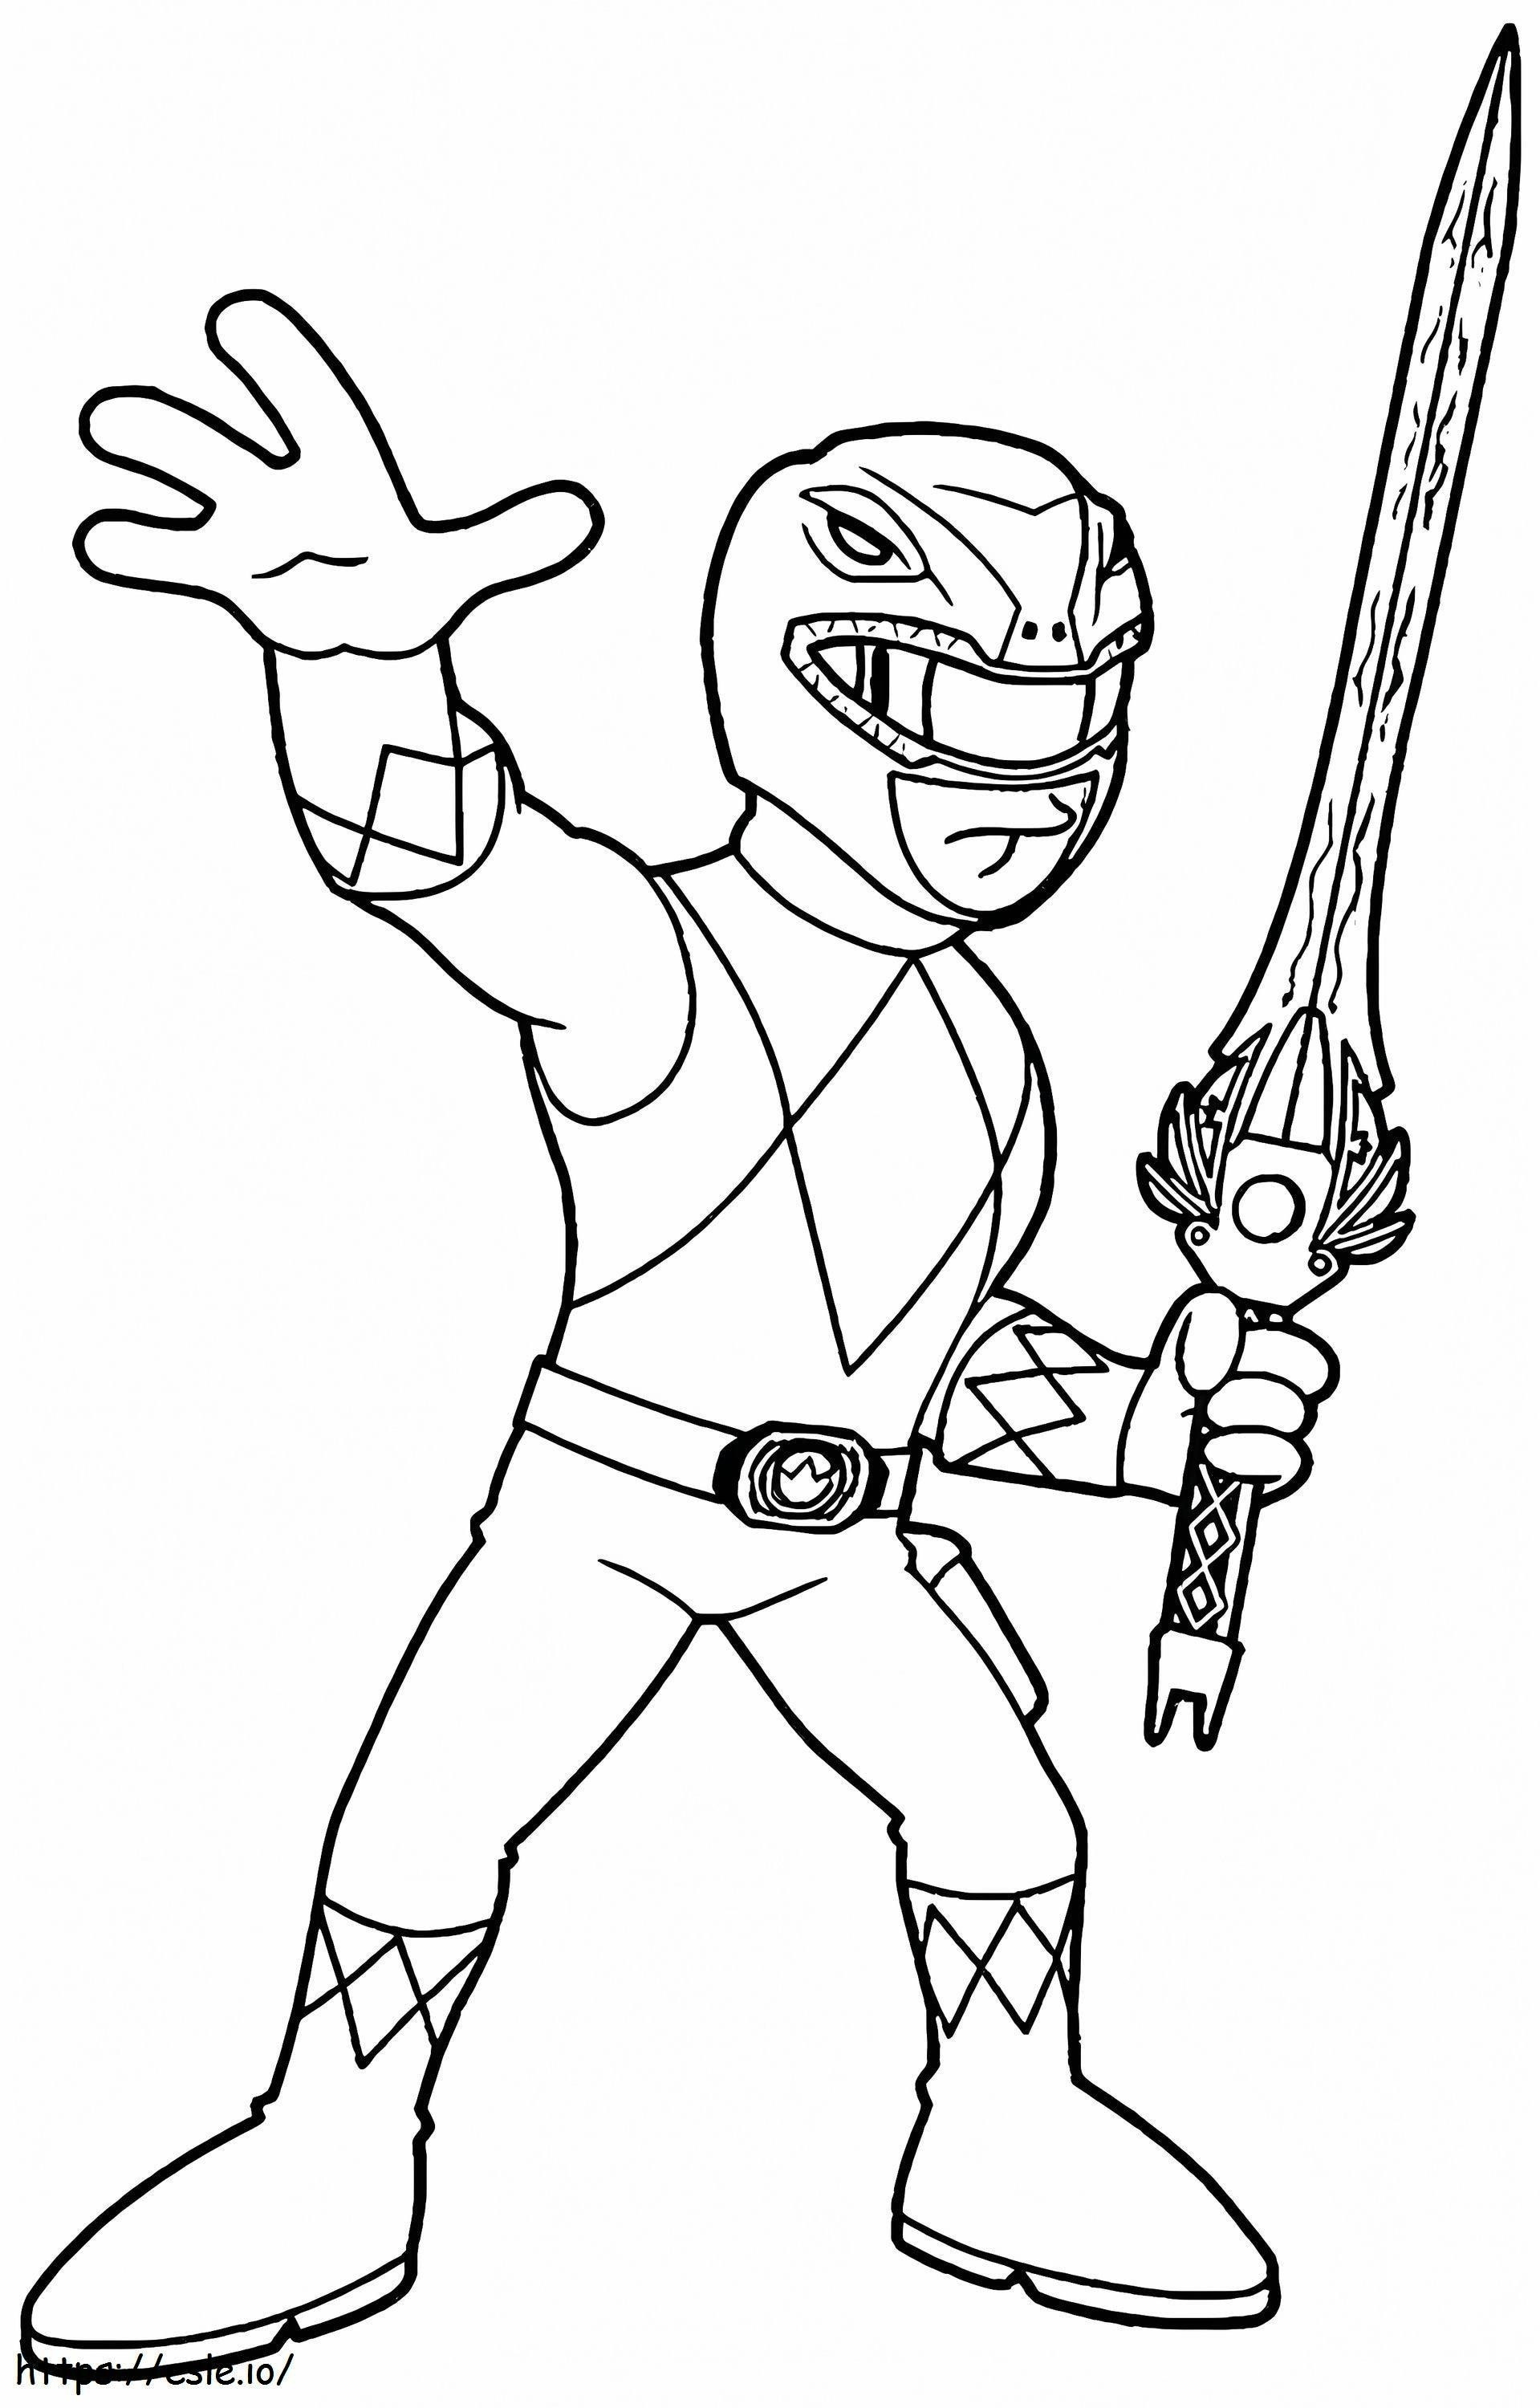 1542766383 Power Rangers Colouring Pages Printable Power Ranger Power Ranger Colouring Pages Printable Power Rangers Power Rangers Power Rangers Samurai Zords coloring page